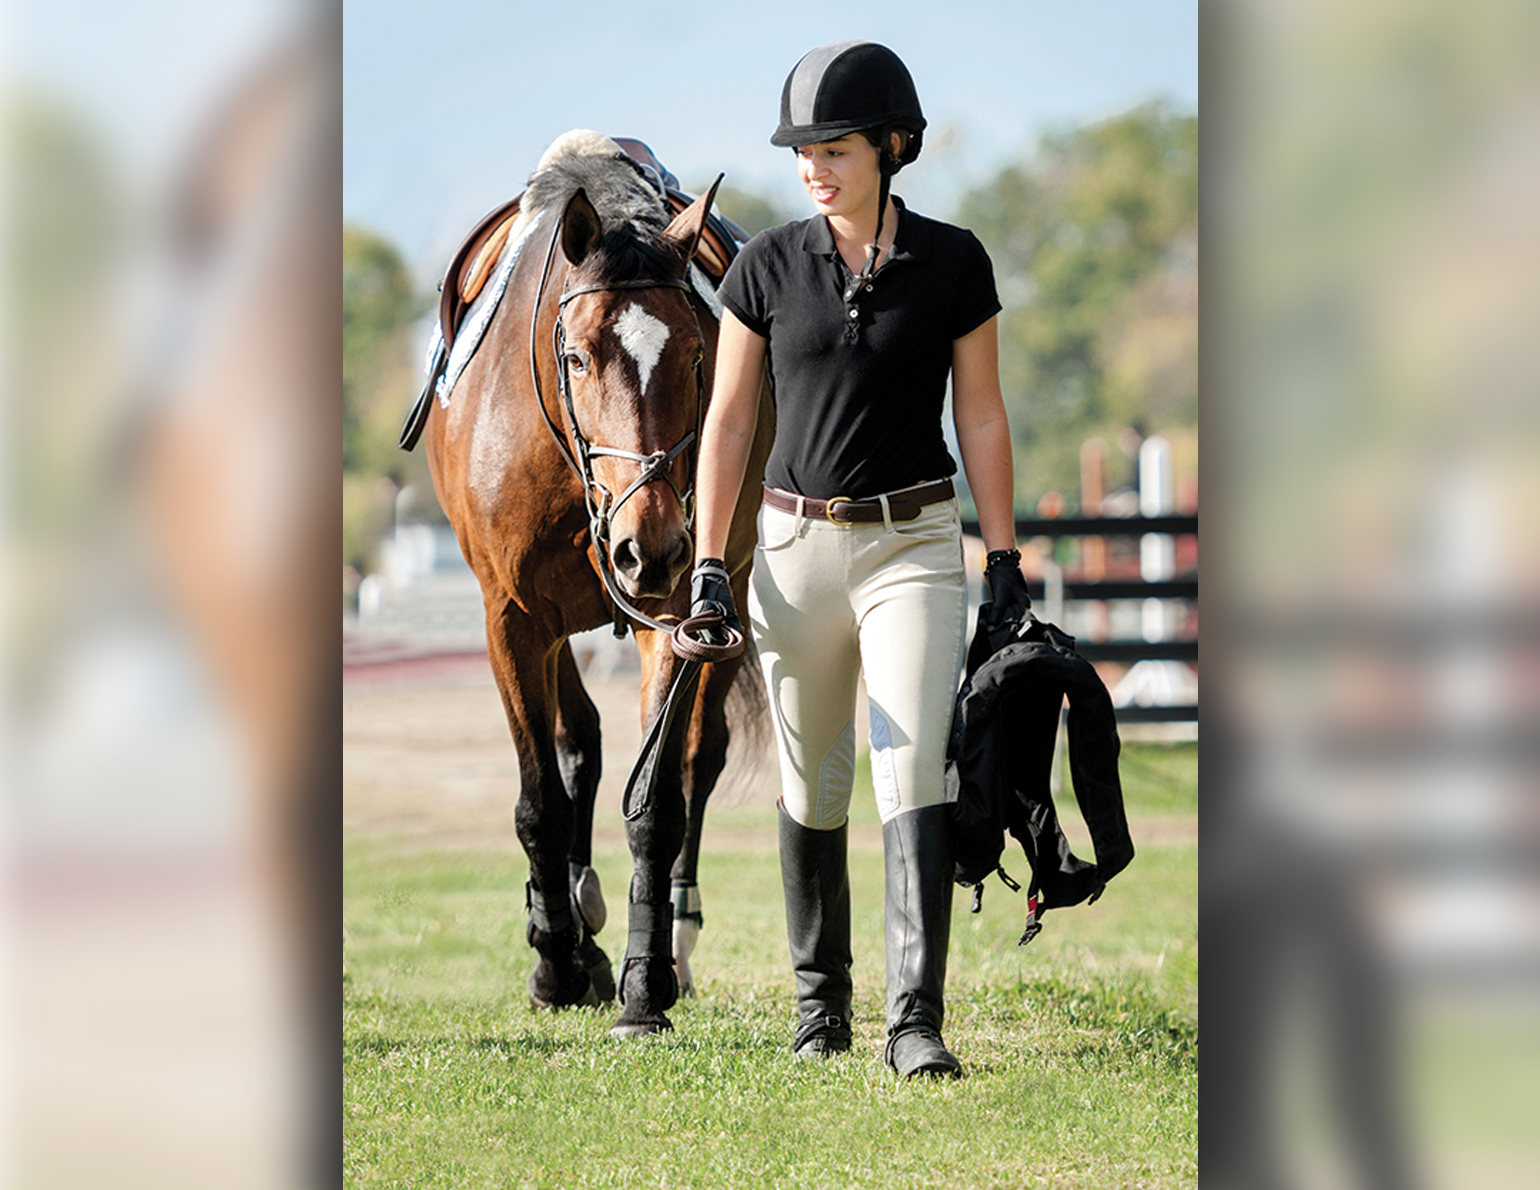 How to Find the Perfect Horse Riding Gear | Horse Journals